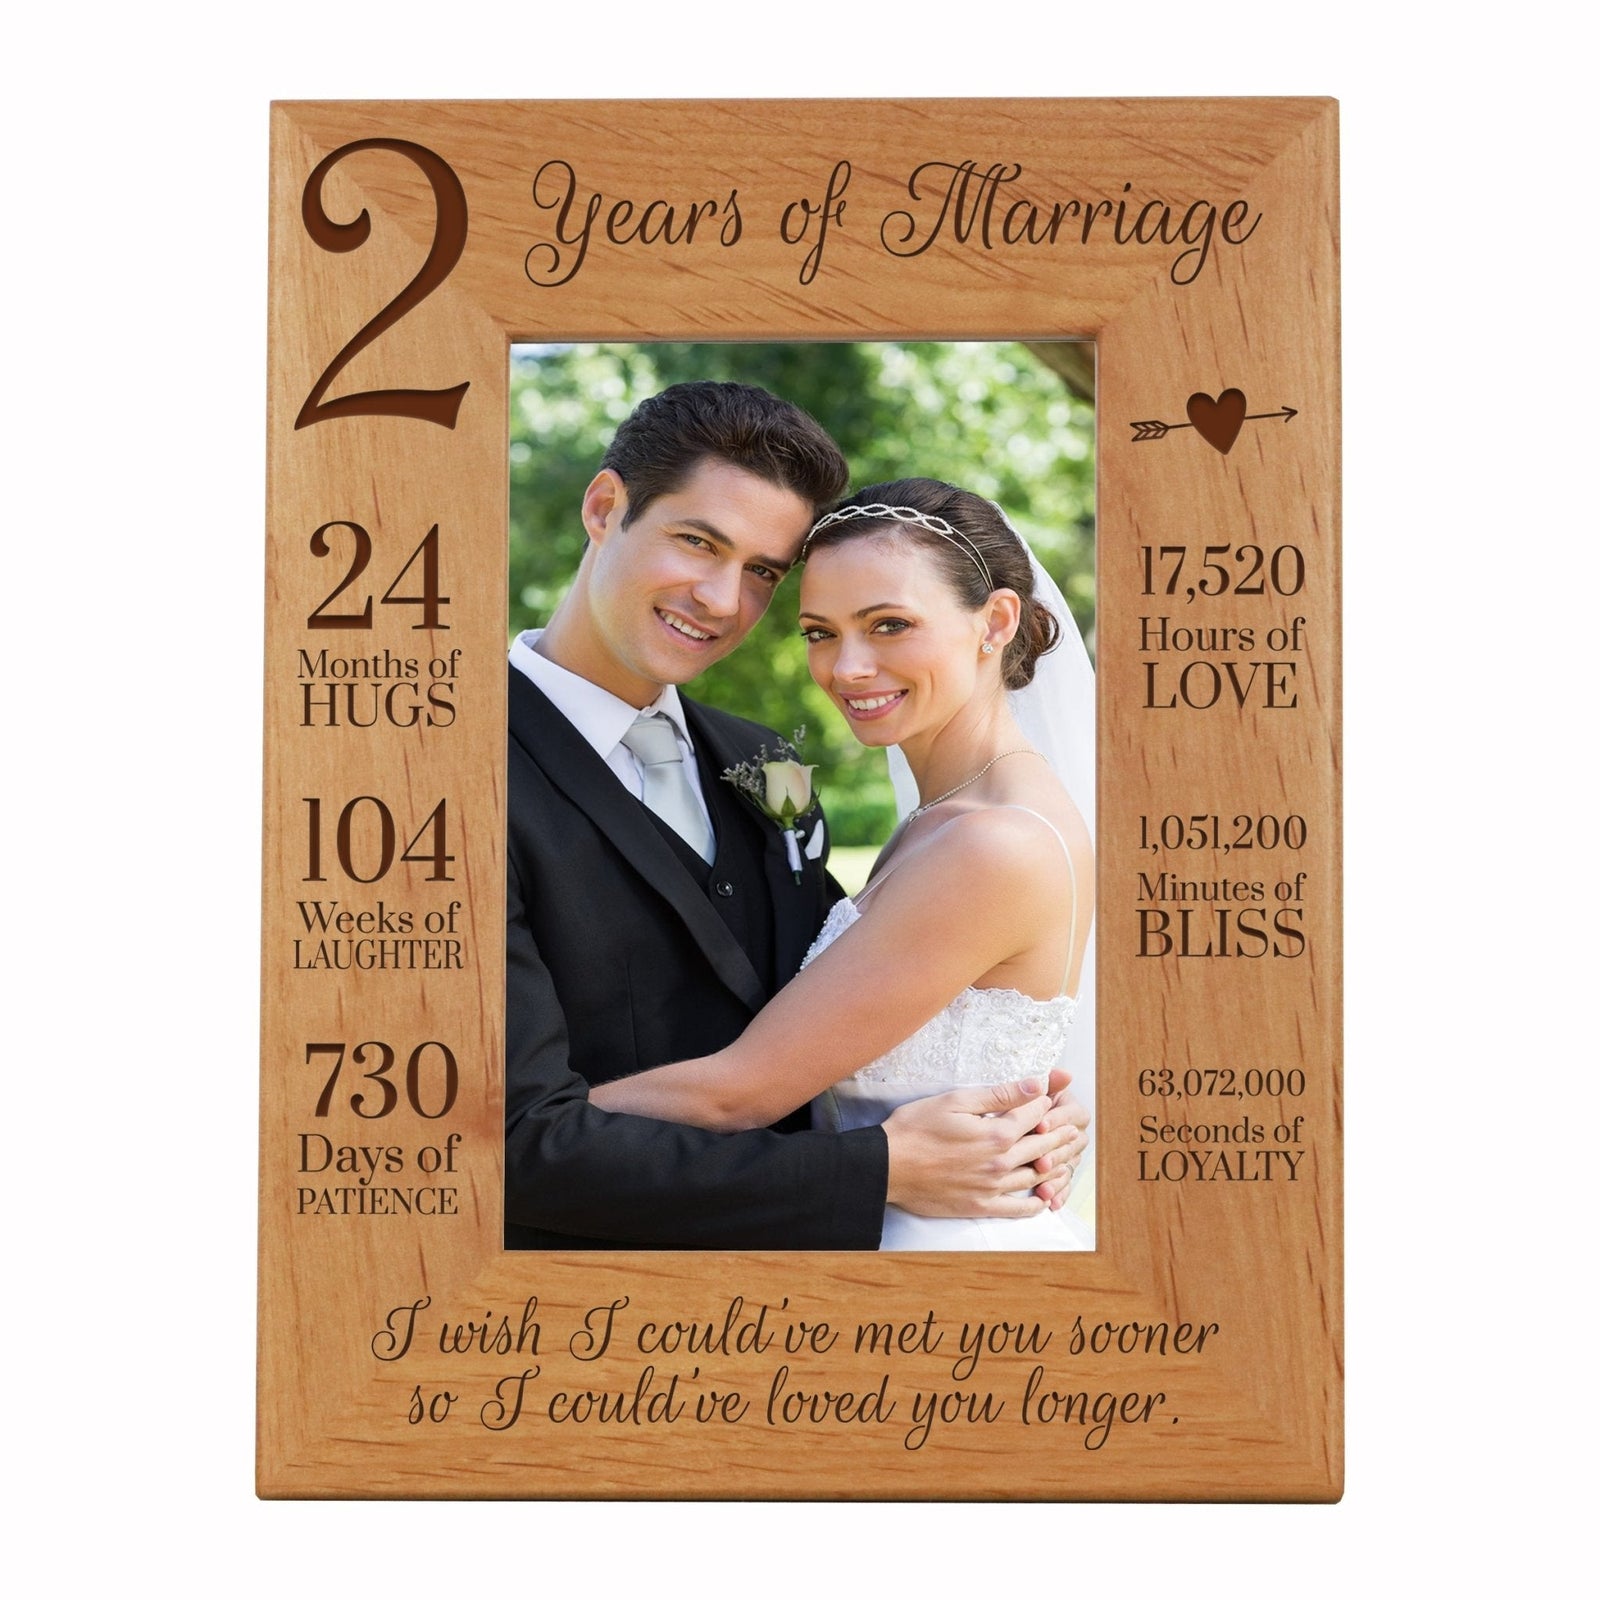 Engraved 2nd Anniversary Picture Frame Gift for Couples - Met You Sooner - LifeSong Milestones